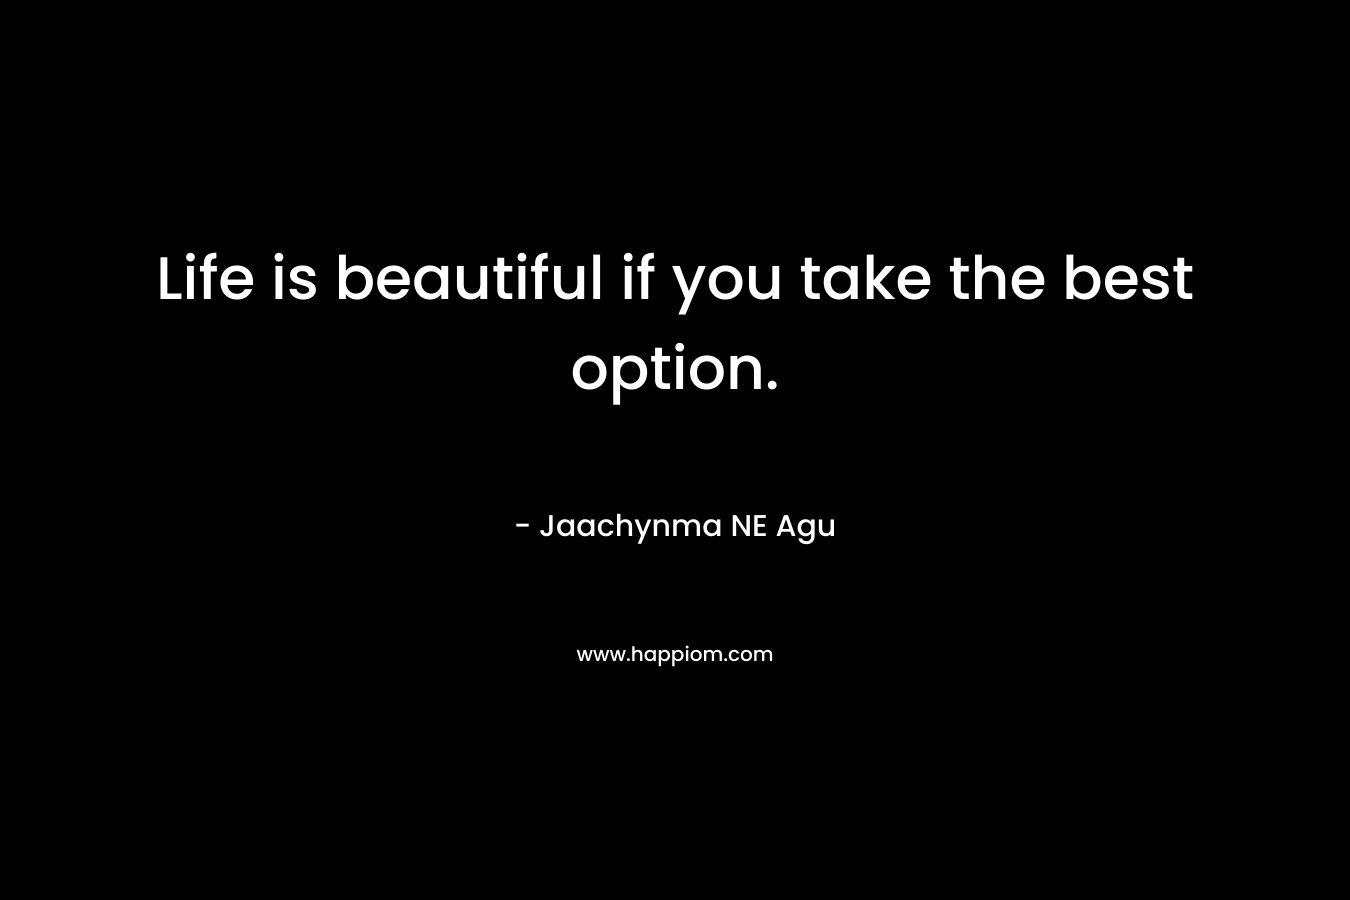 Life is beautiful if you take the best option.